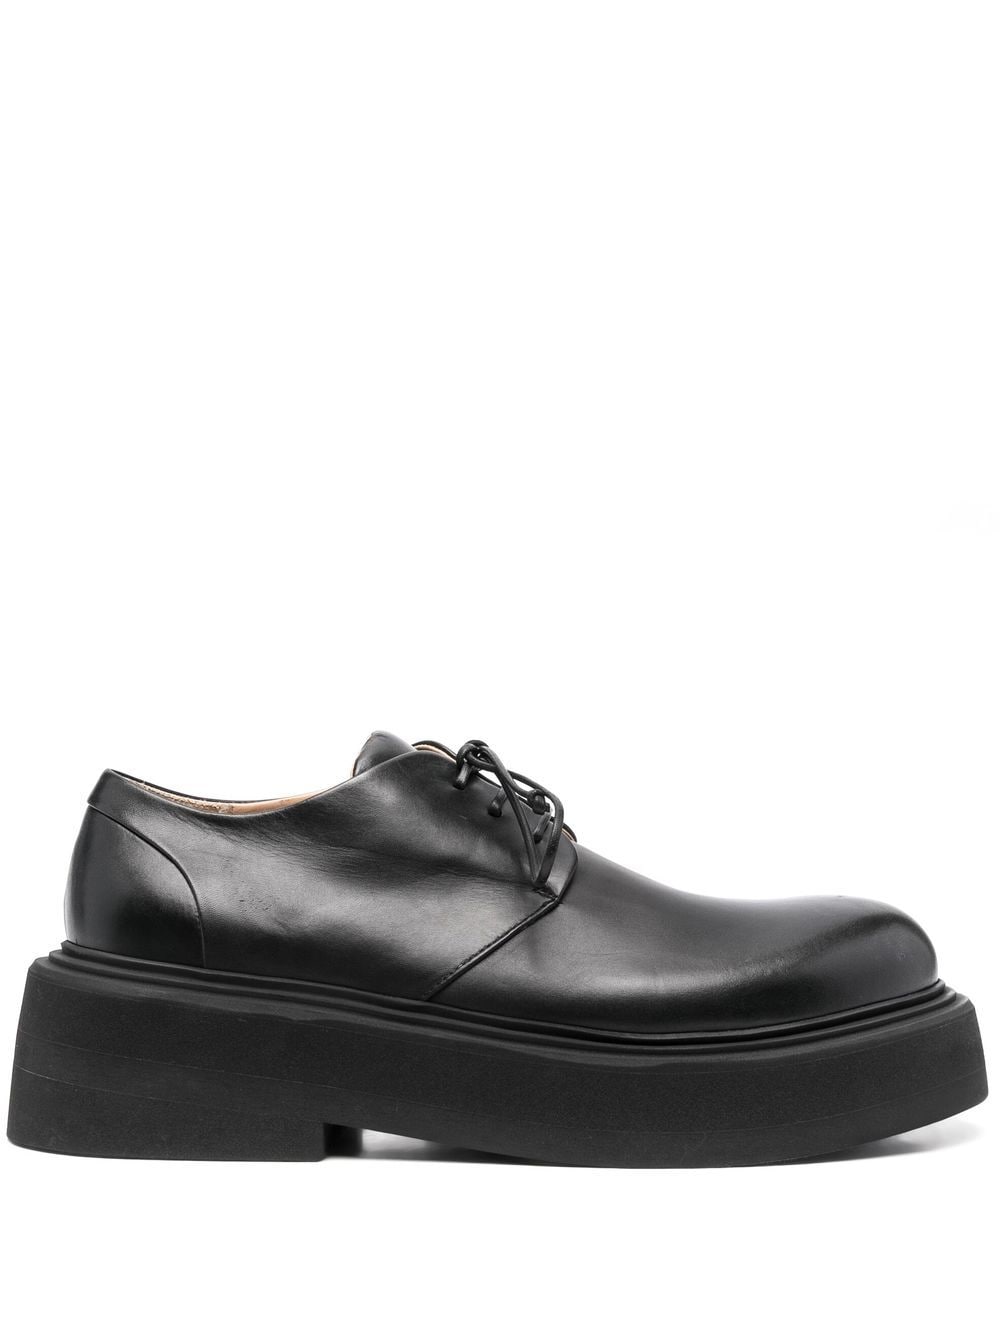 MARSÈLL CHUNKY-HEEL LEATHER DERBY SHOES